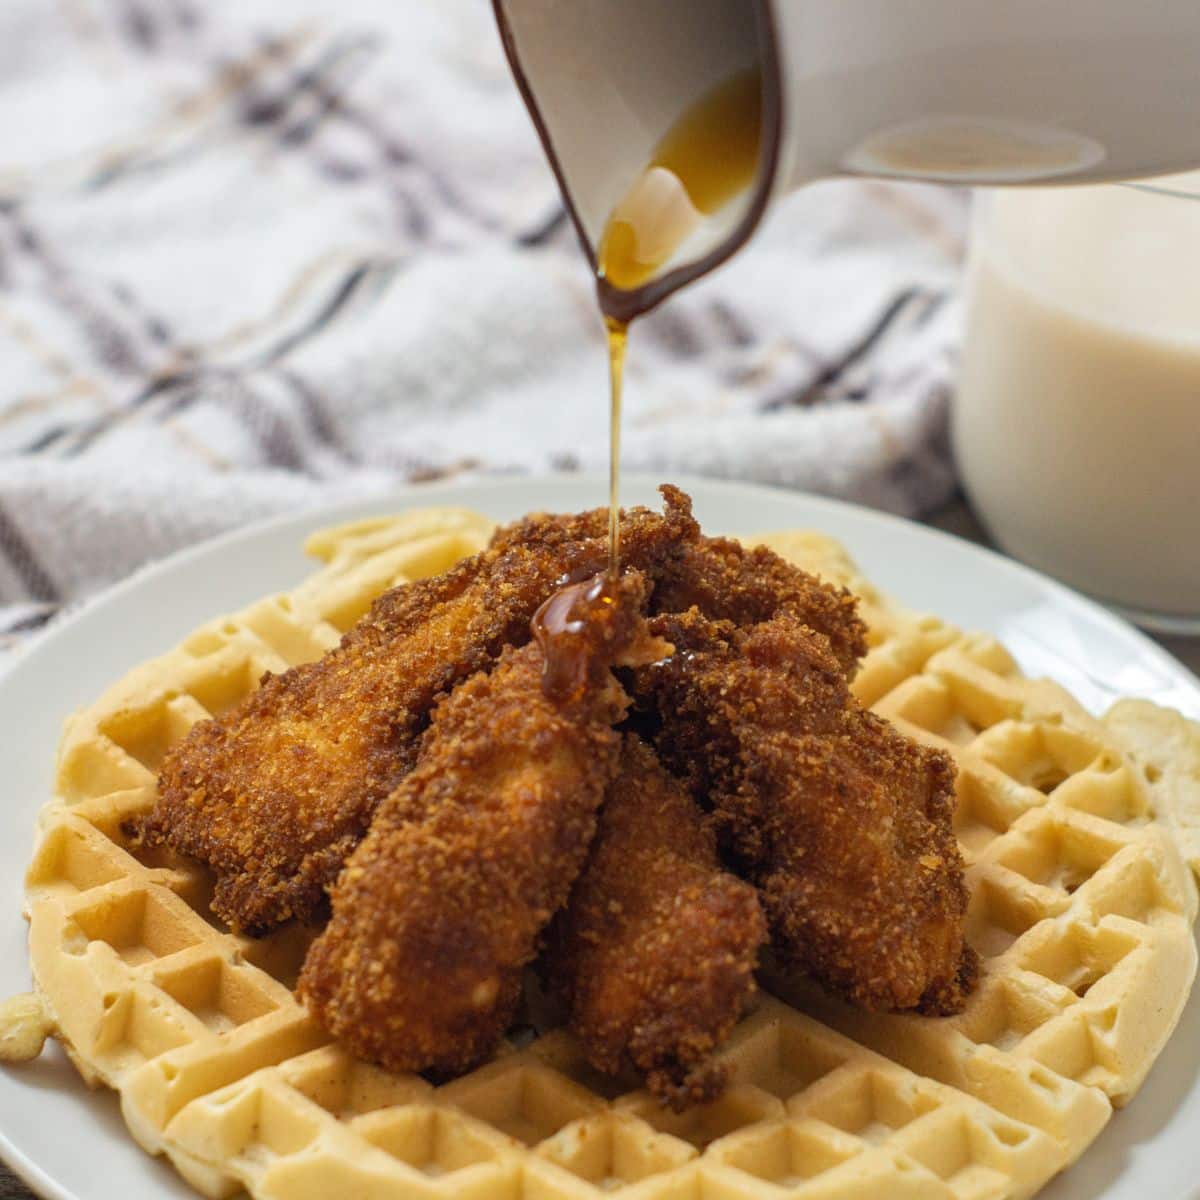 Southern Chicken and Waffles: Crispy fried chicken atop fluffy waffles, drizzled with syrup.